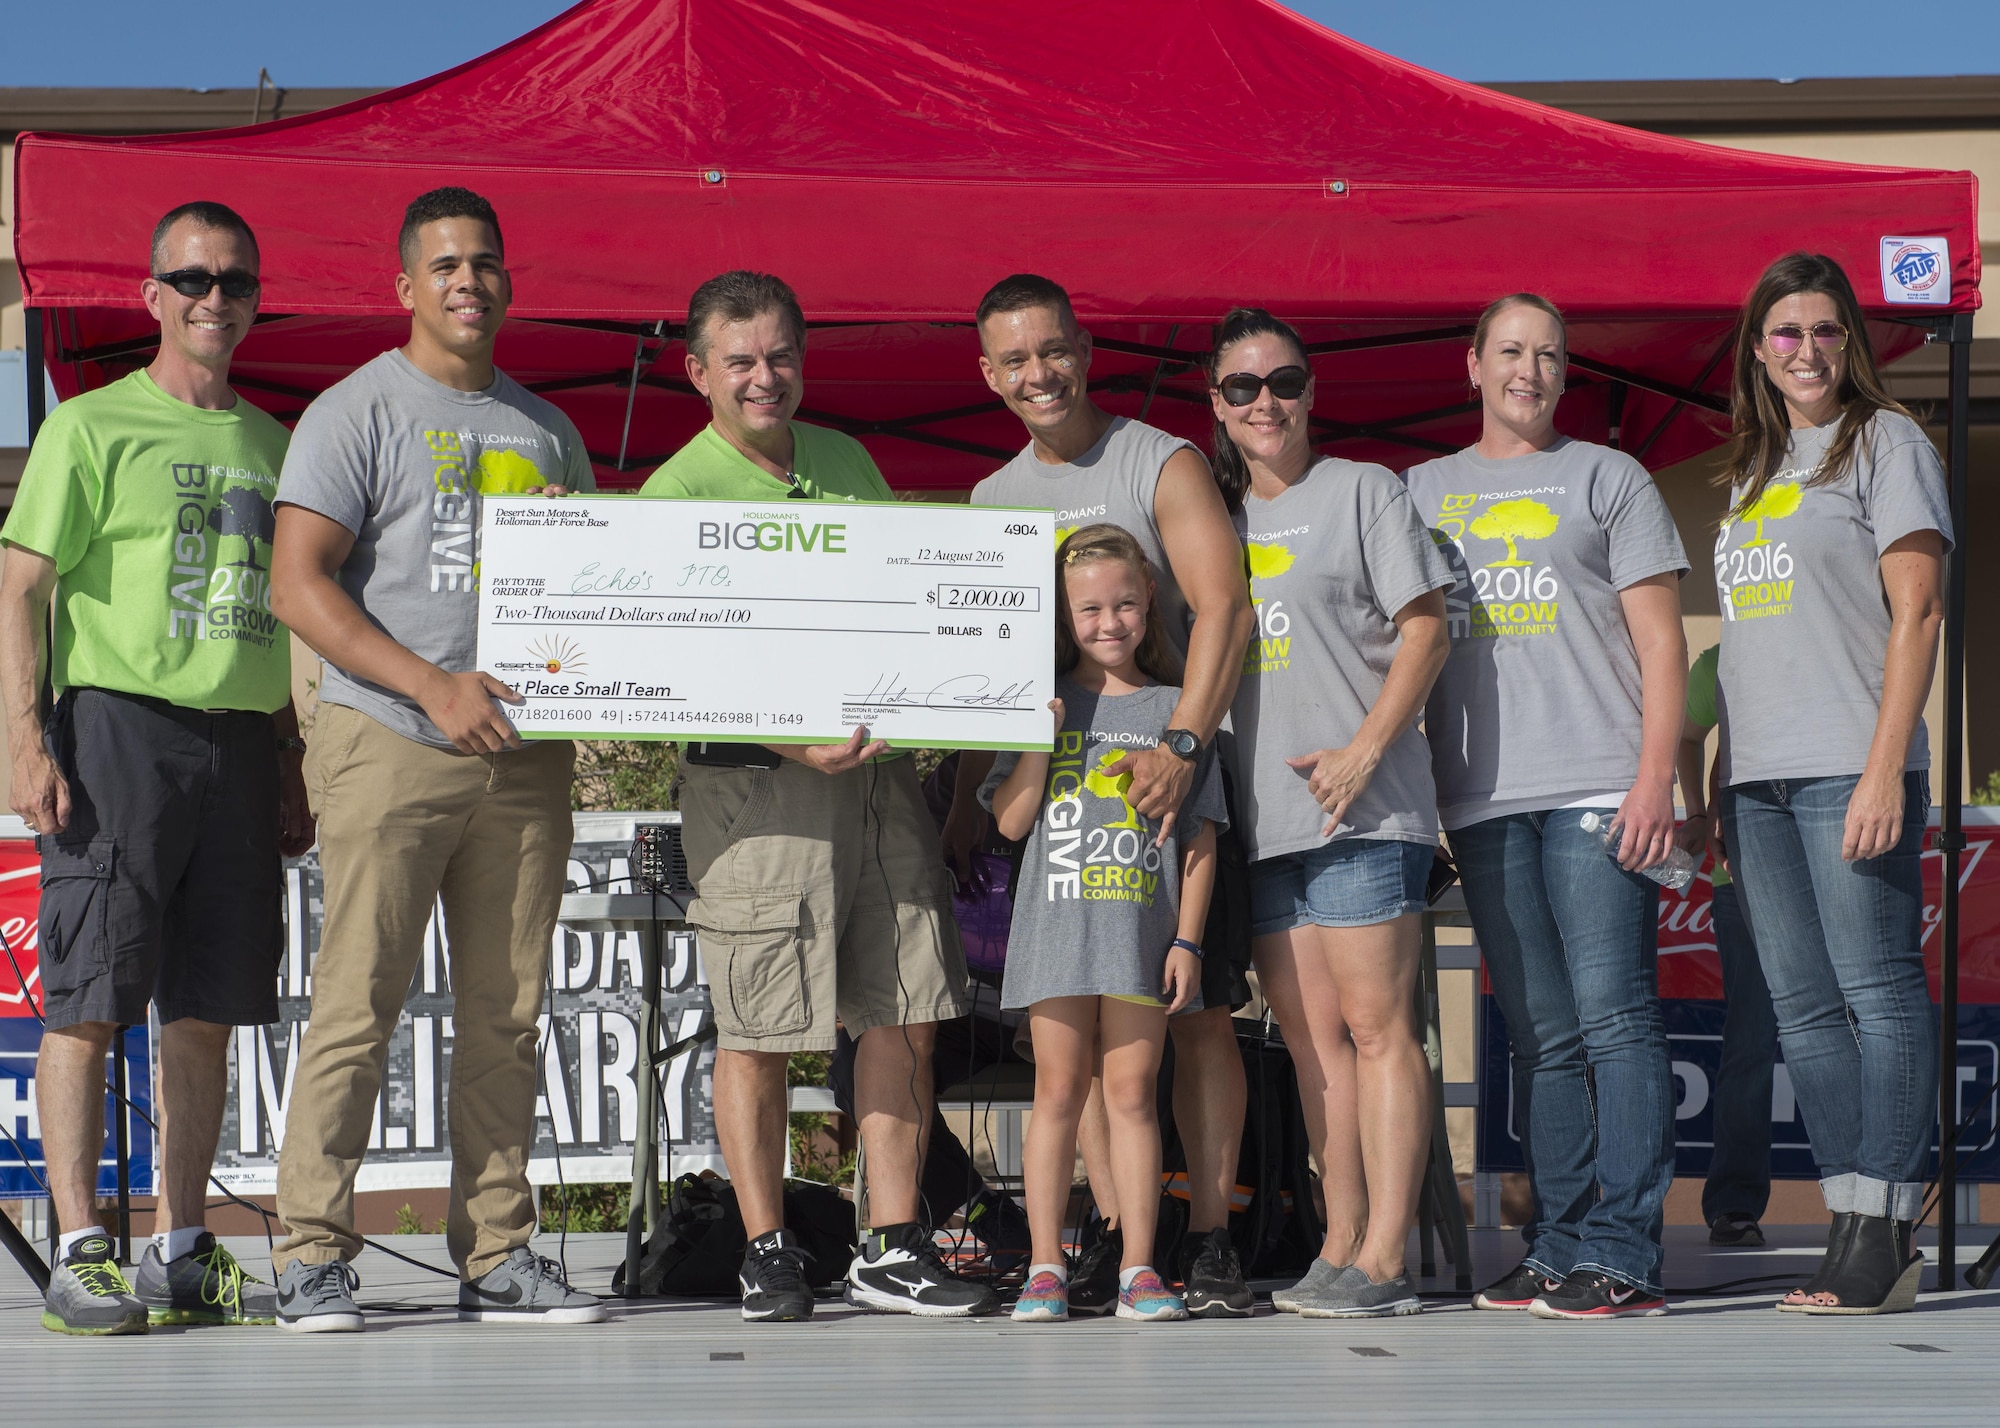 Members from the 49th Mission Support Group’s Echo’s PTO receive their $2,000 reward for winning the Small Team Award at the Big Give after-party August 12, 2016 at Holloman Air Force Base, N.M. Over the course of three weeks, 32 teams of 412 participants spent nearly 5,000 man hours volunteering in the local community — saving the area $202,092.33. (U.S. Air Force photo by Airman 1st Class Randahl J. Jenson)